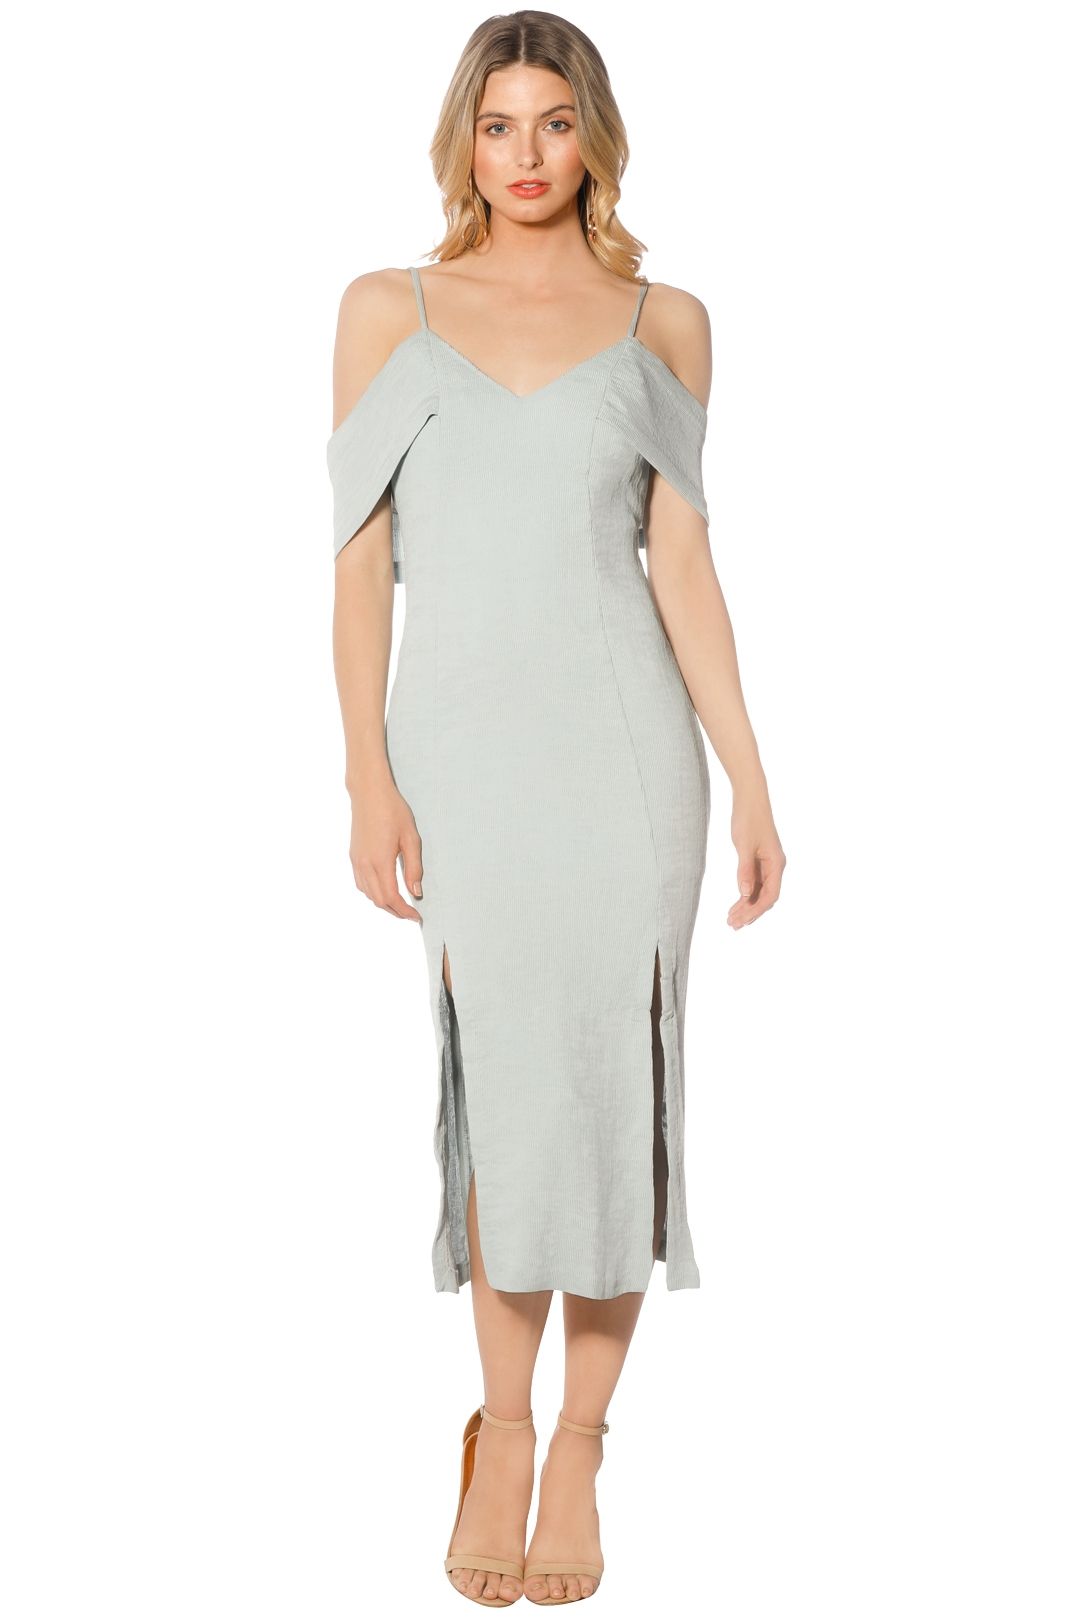 Blessed are the Meek - Ella Dress - Dusty Blue - Front